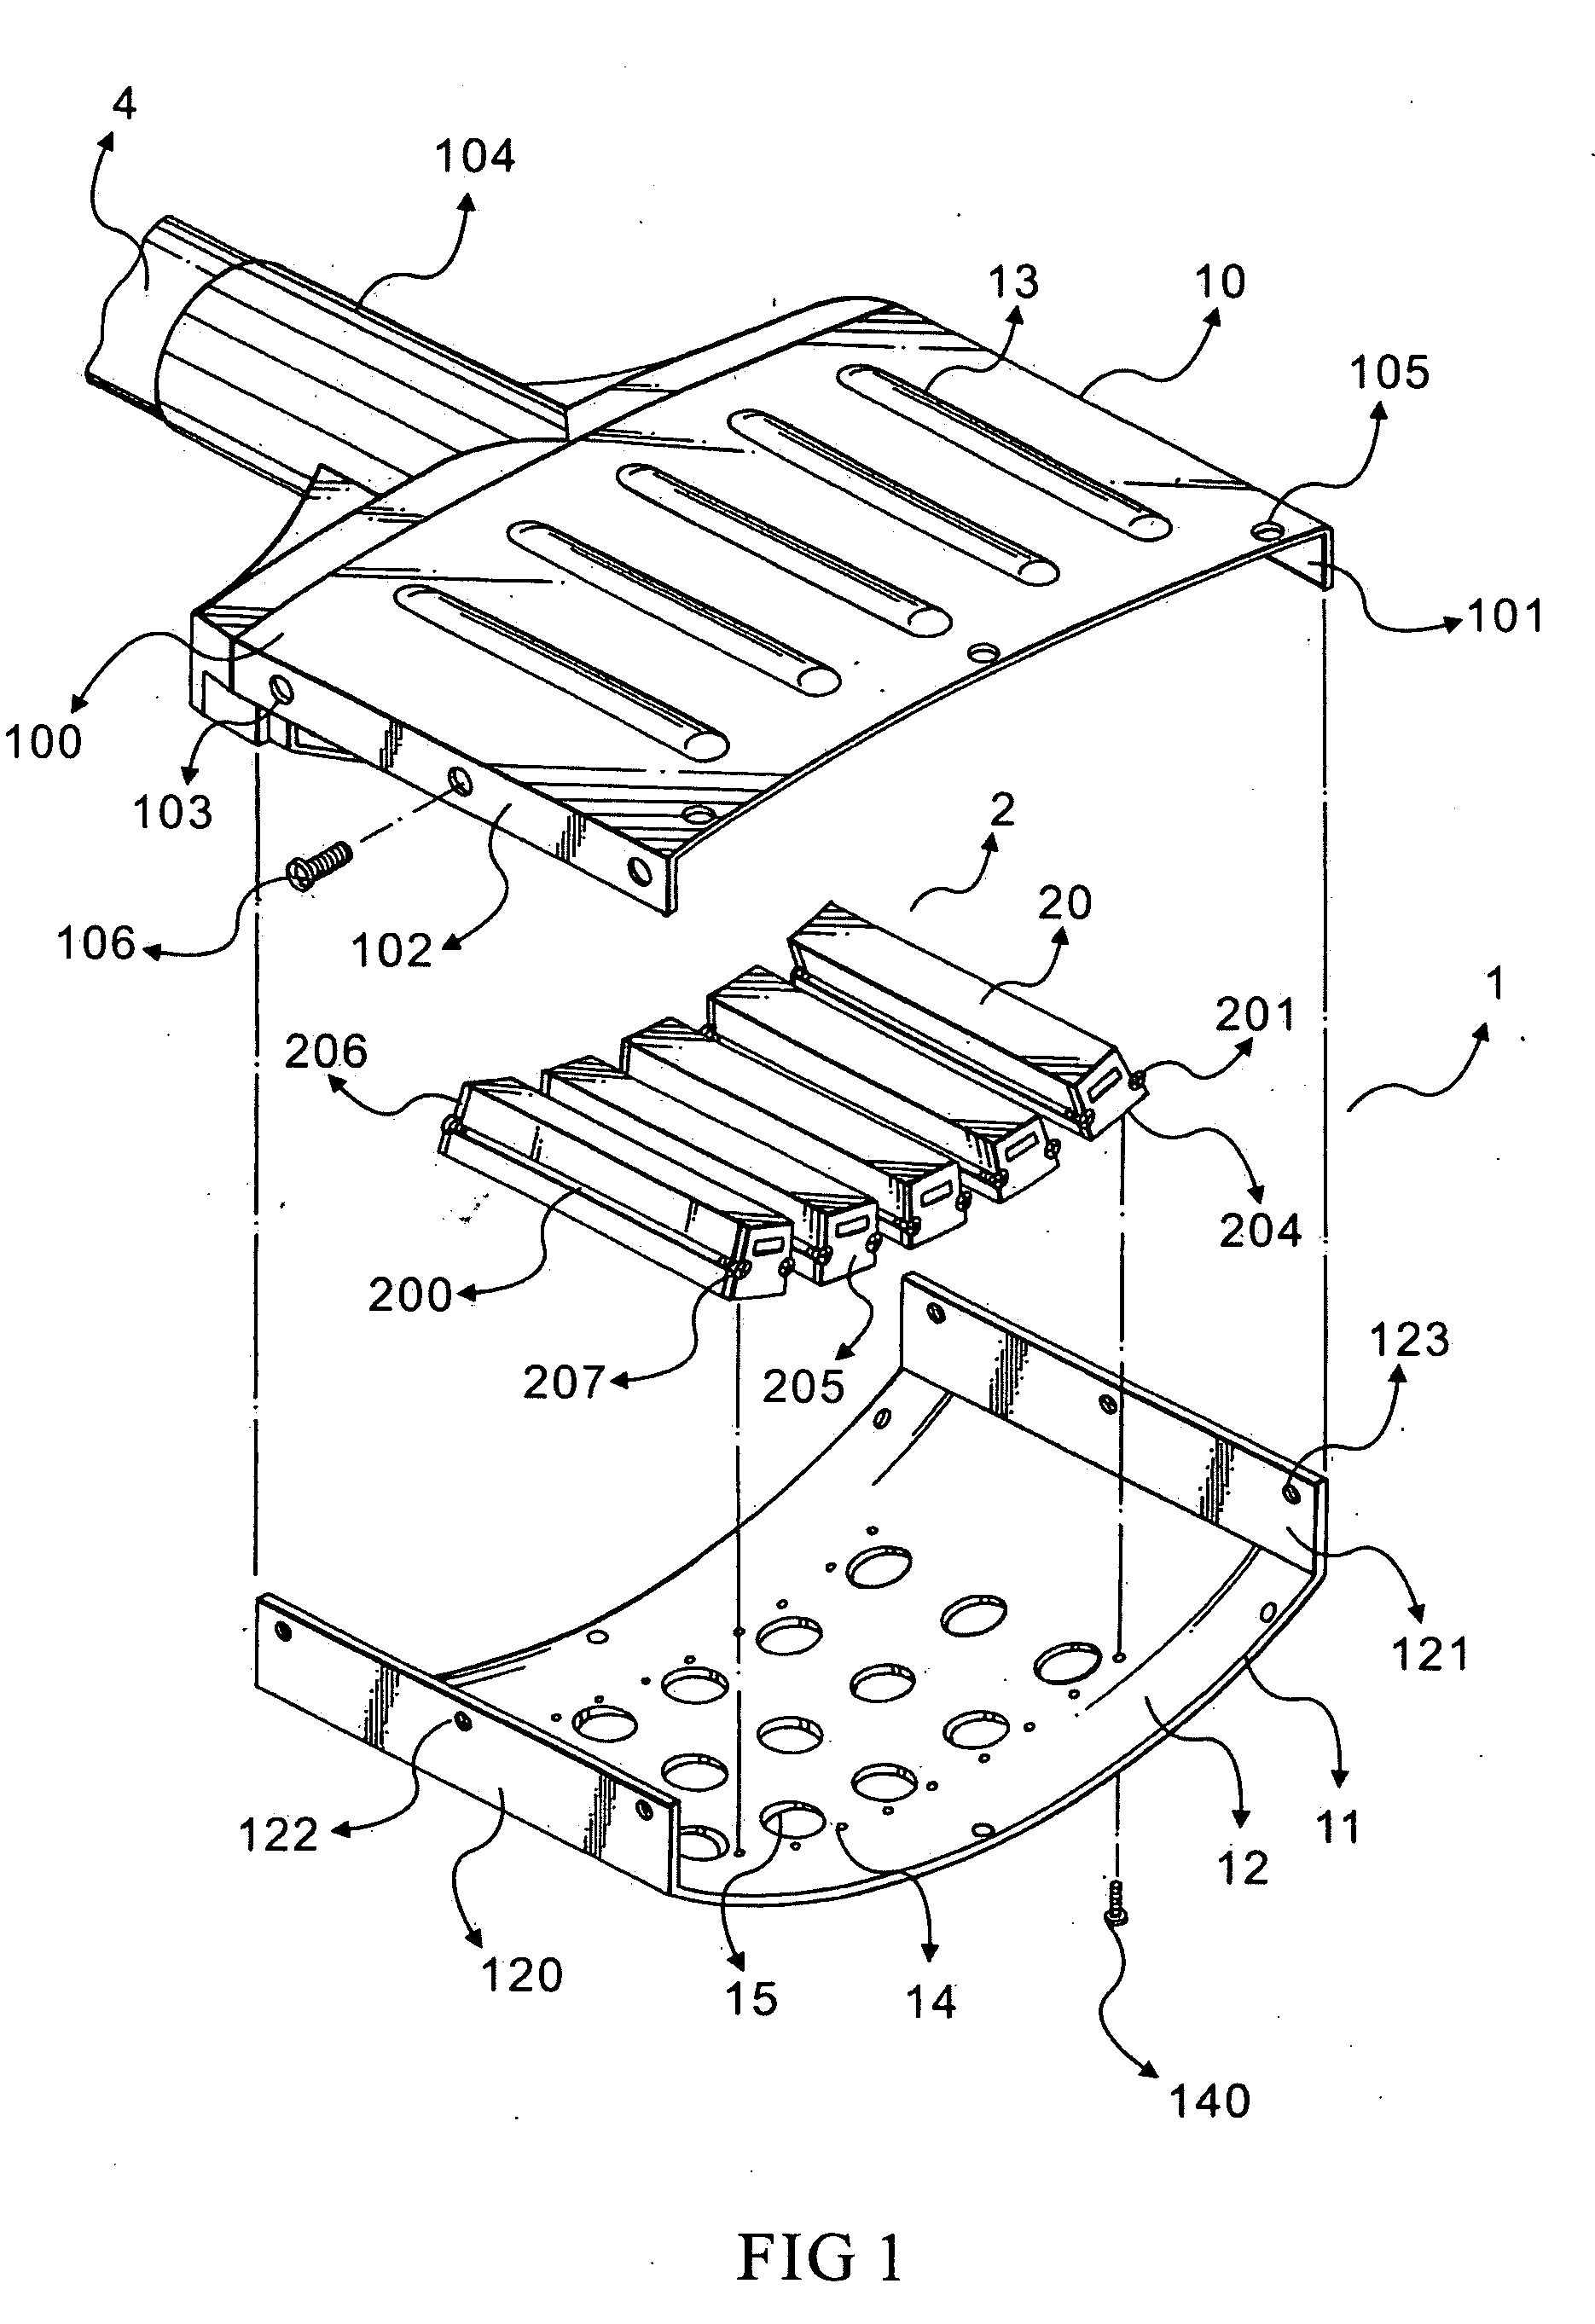 LED streetlight with heat-dissipating structure